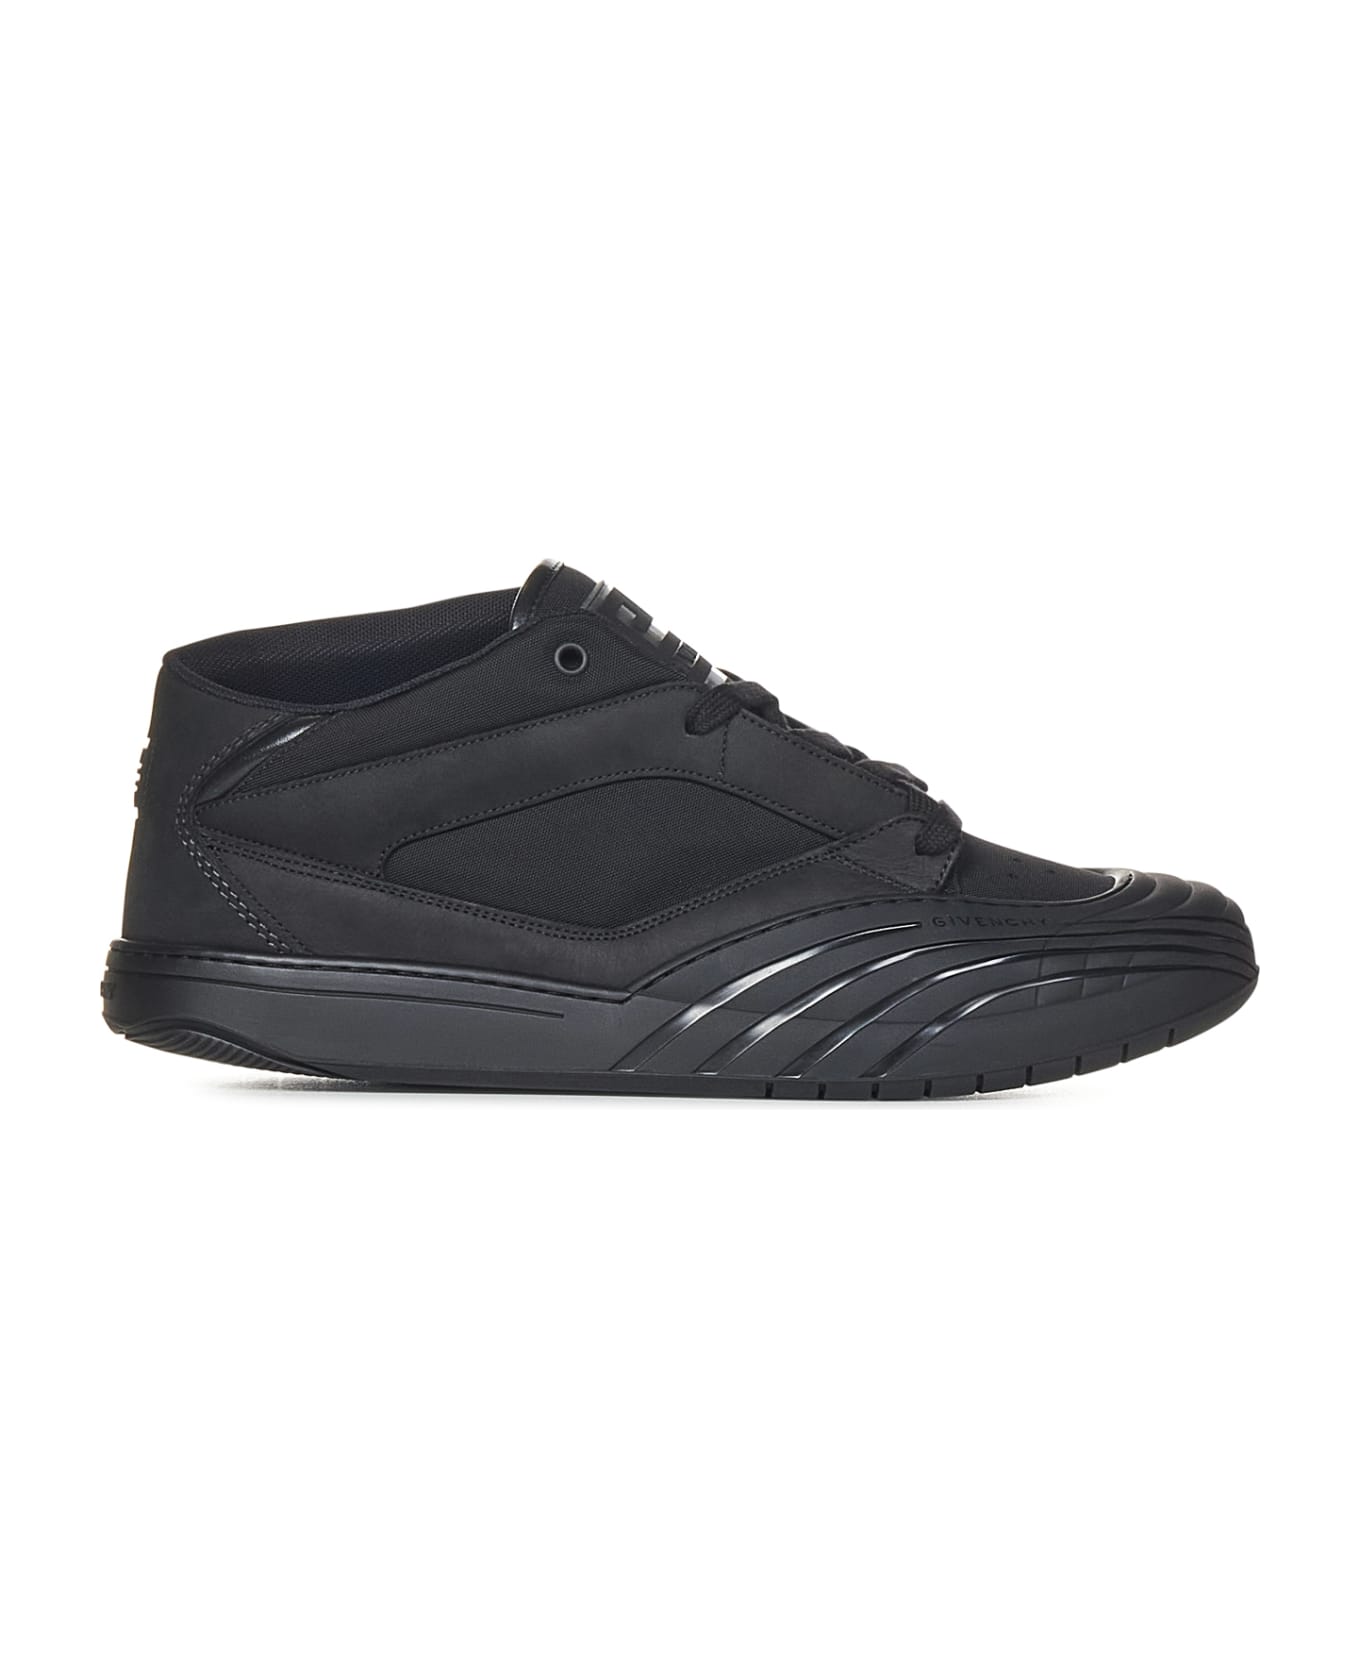 Givenchy Skate Sneakers - Black